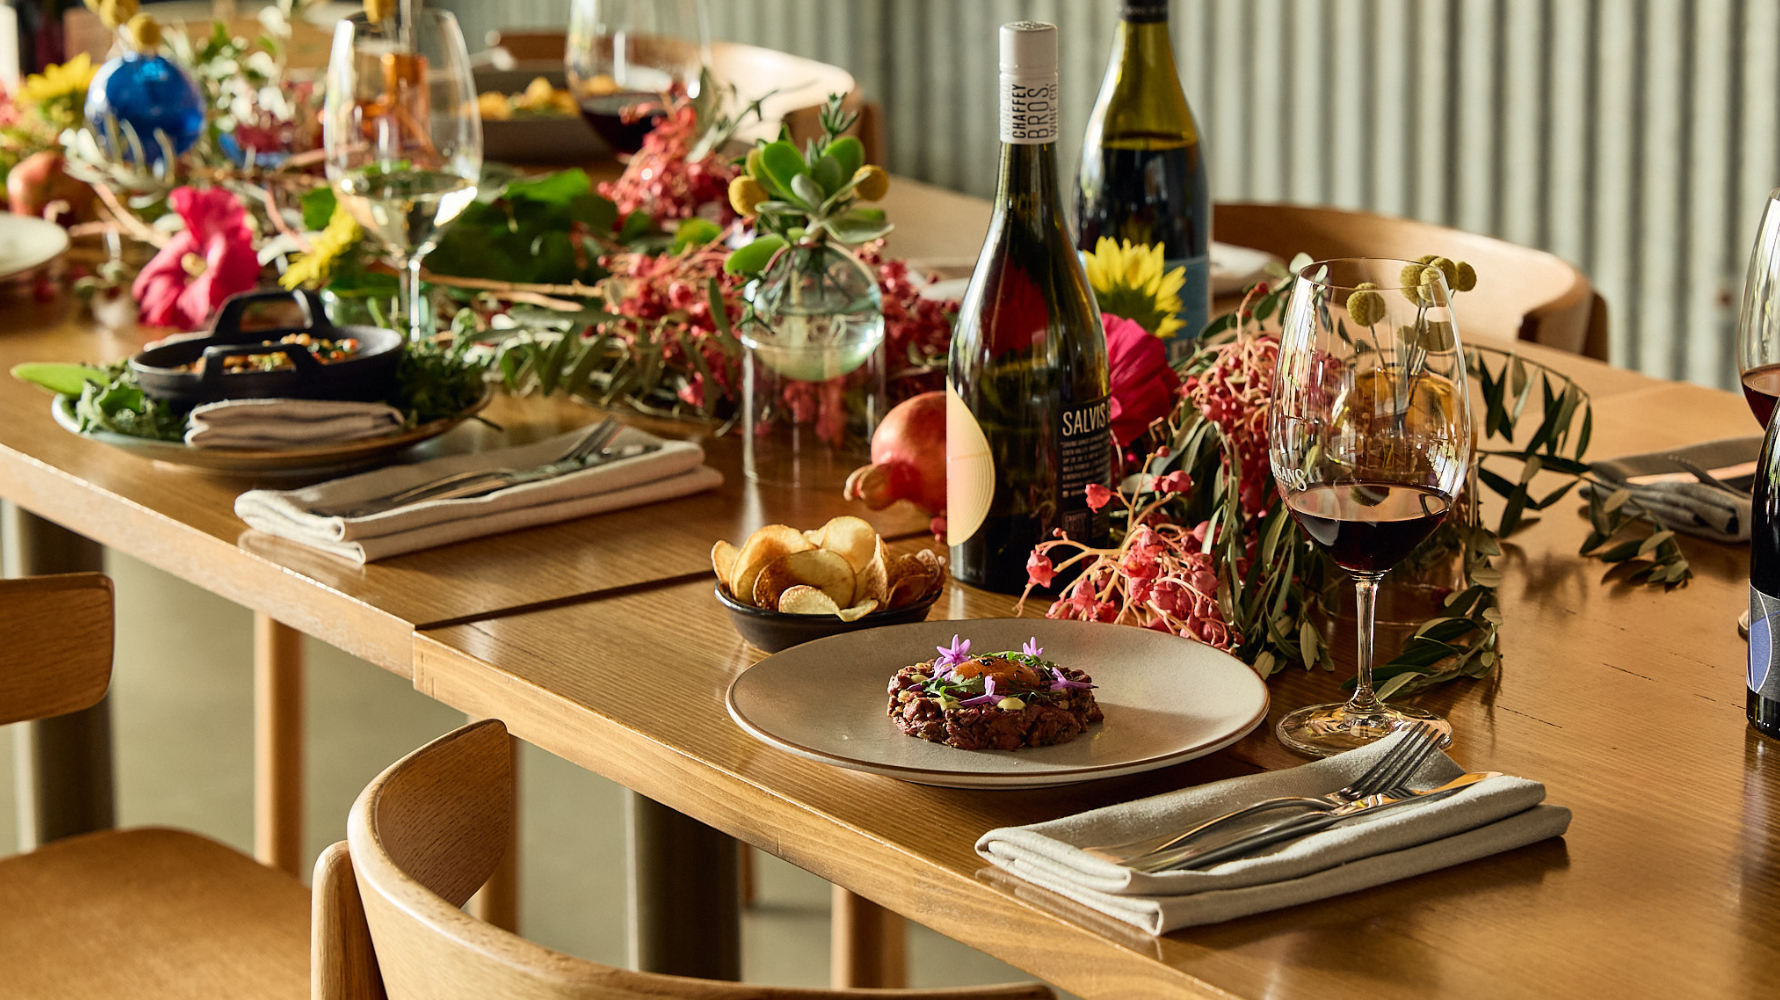 Mother's Day Lunch in Barossa: A Unique Dining Experience at Essen, by Artisans of Barossa